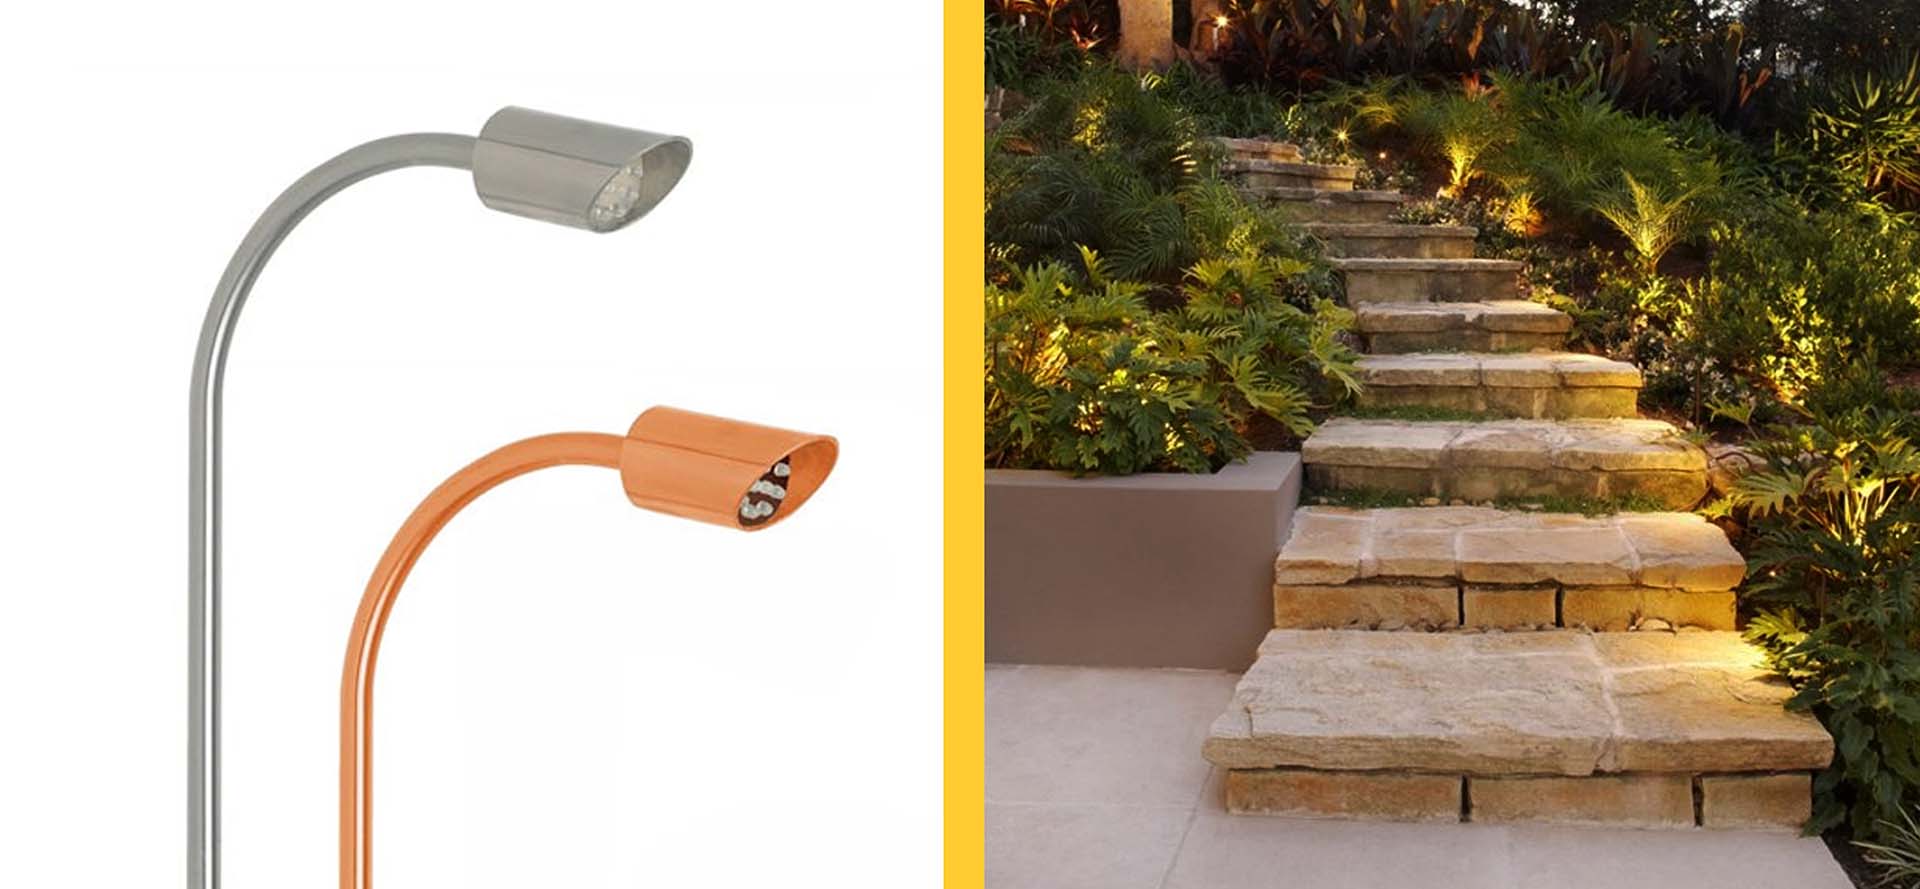 outdoor stair lights